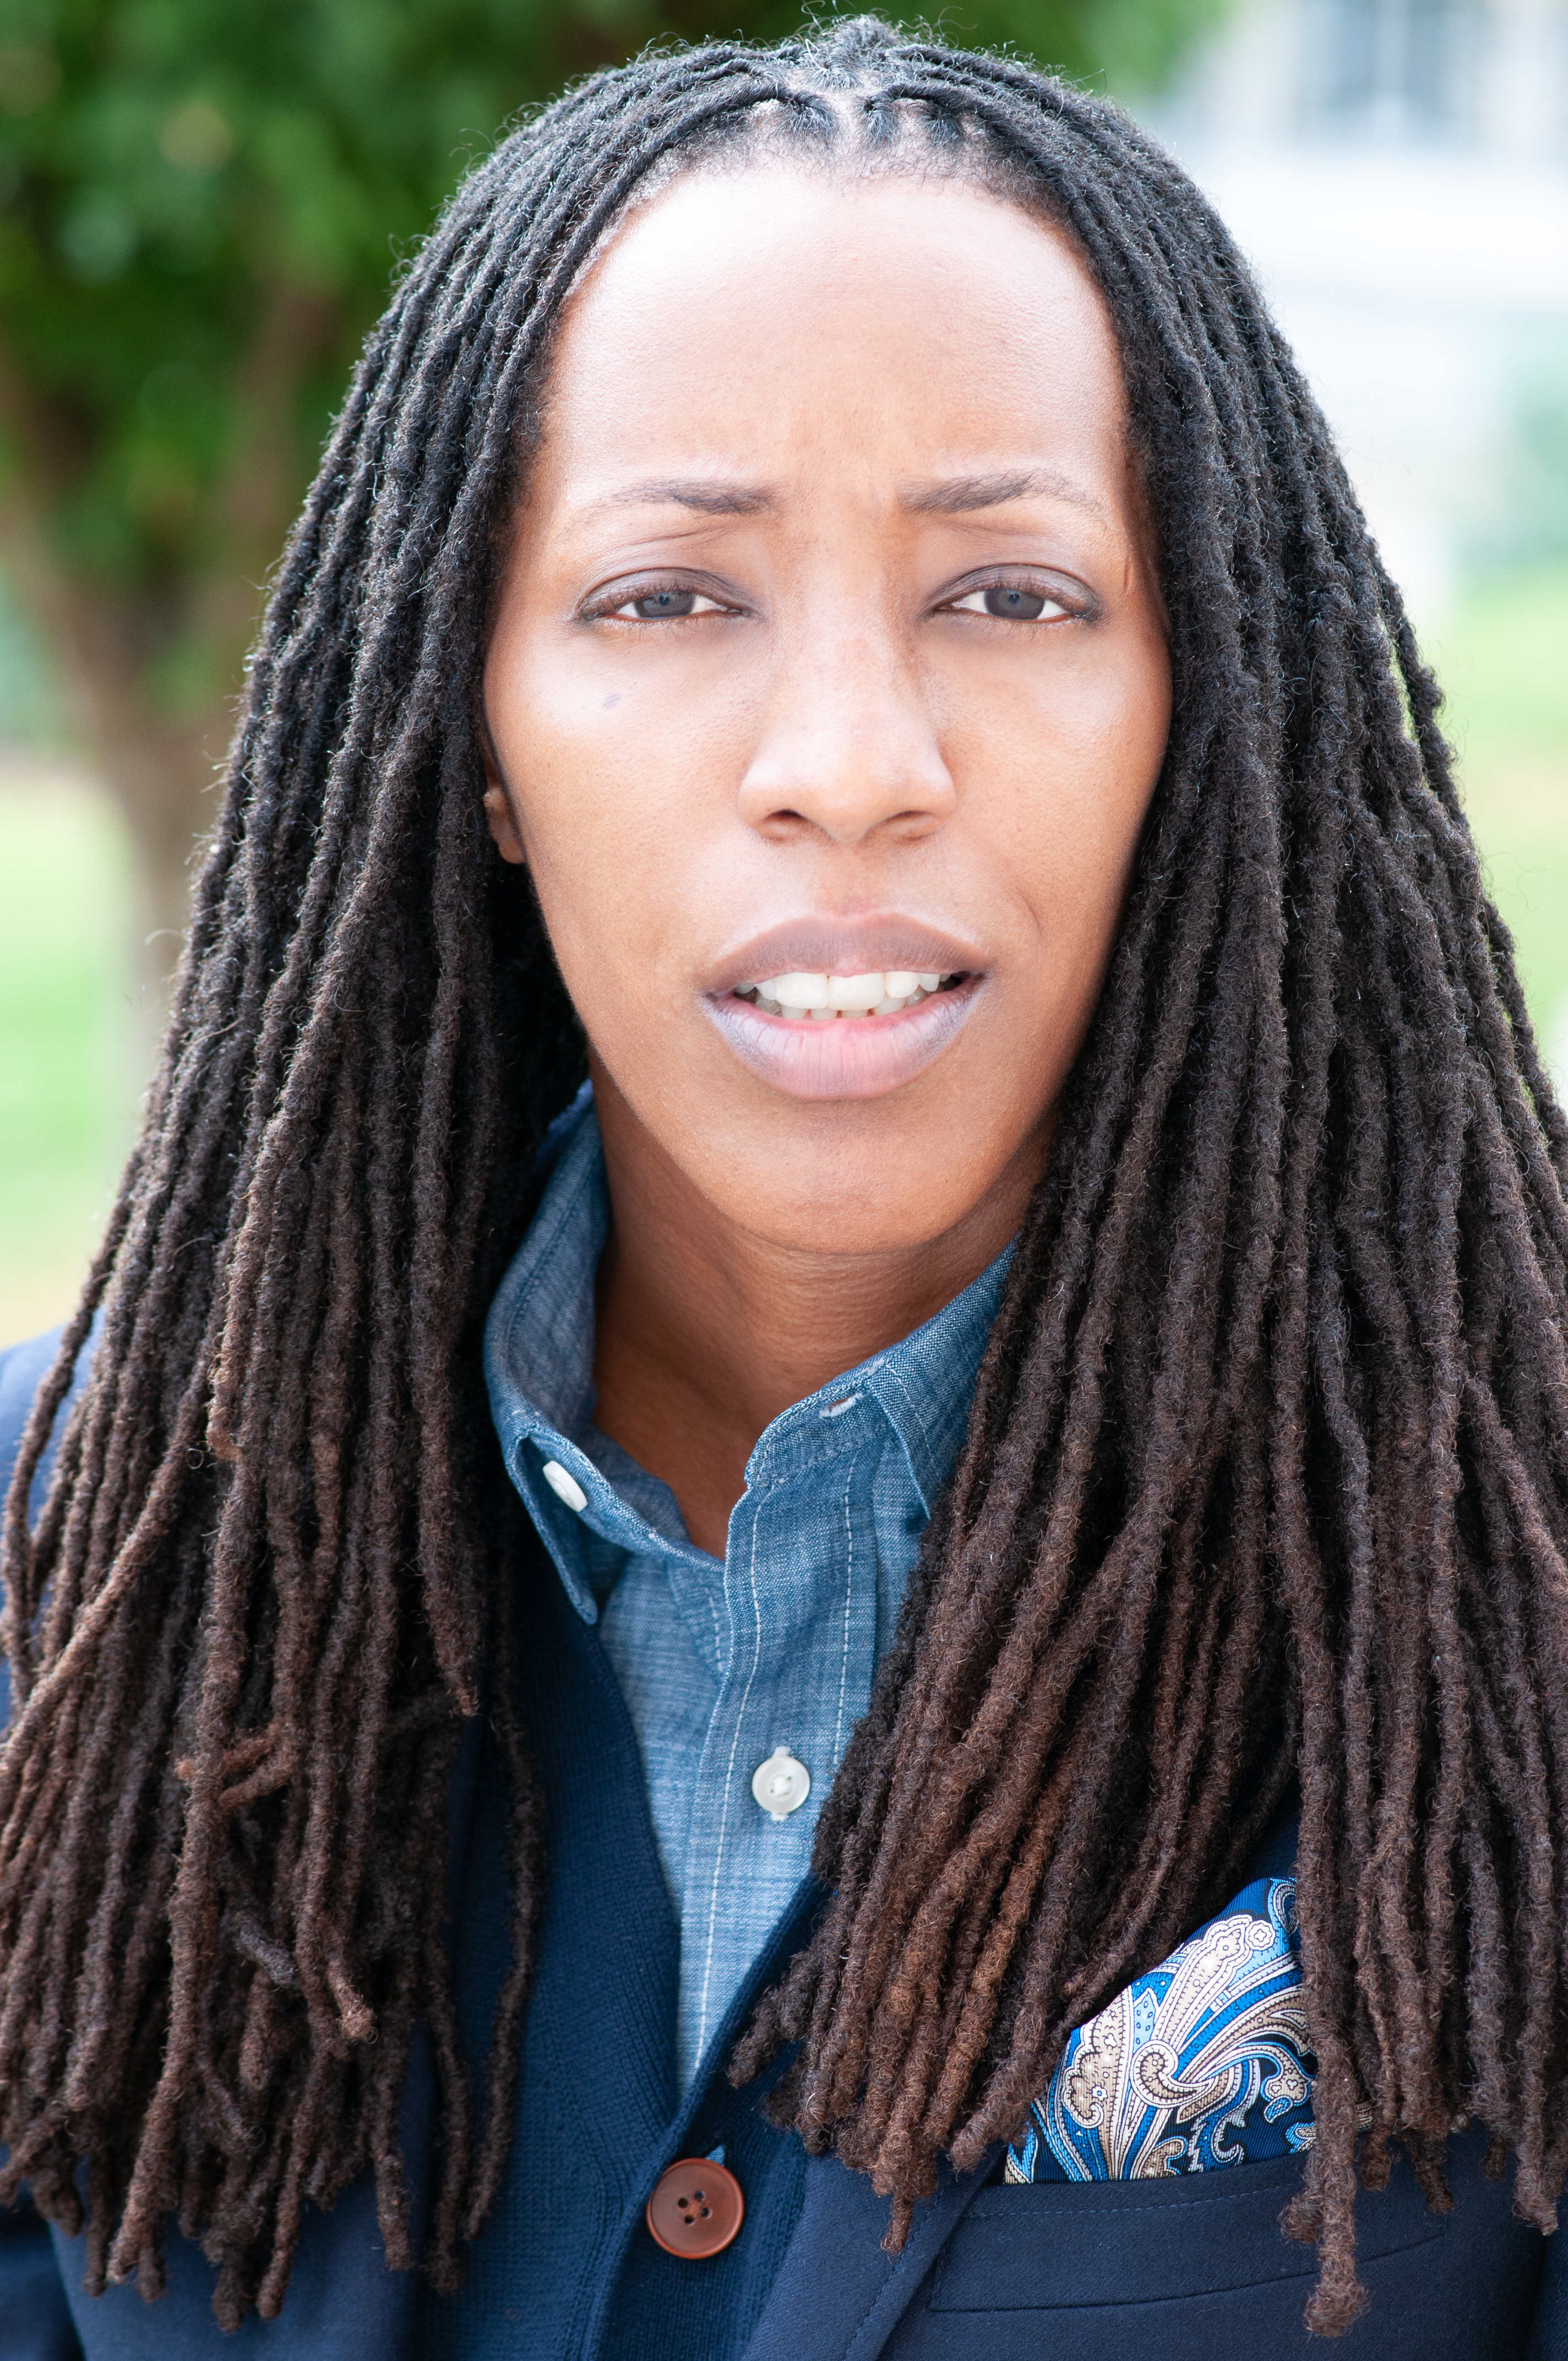 head and shoulders portrait photo of an African American woman with long locs looking intently into camera